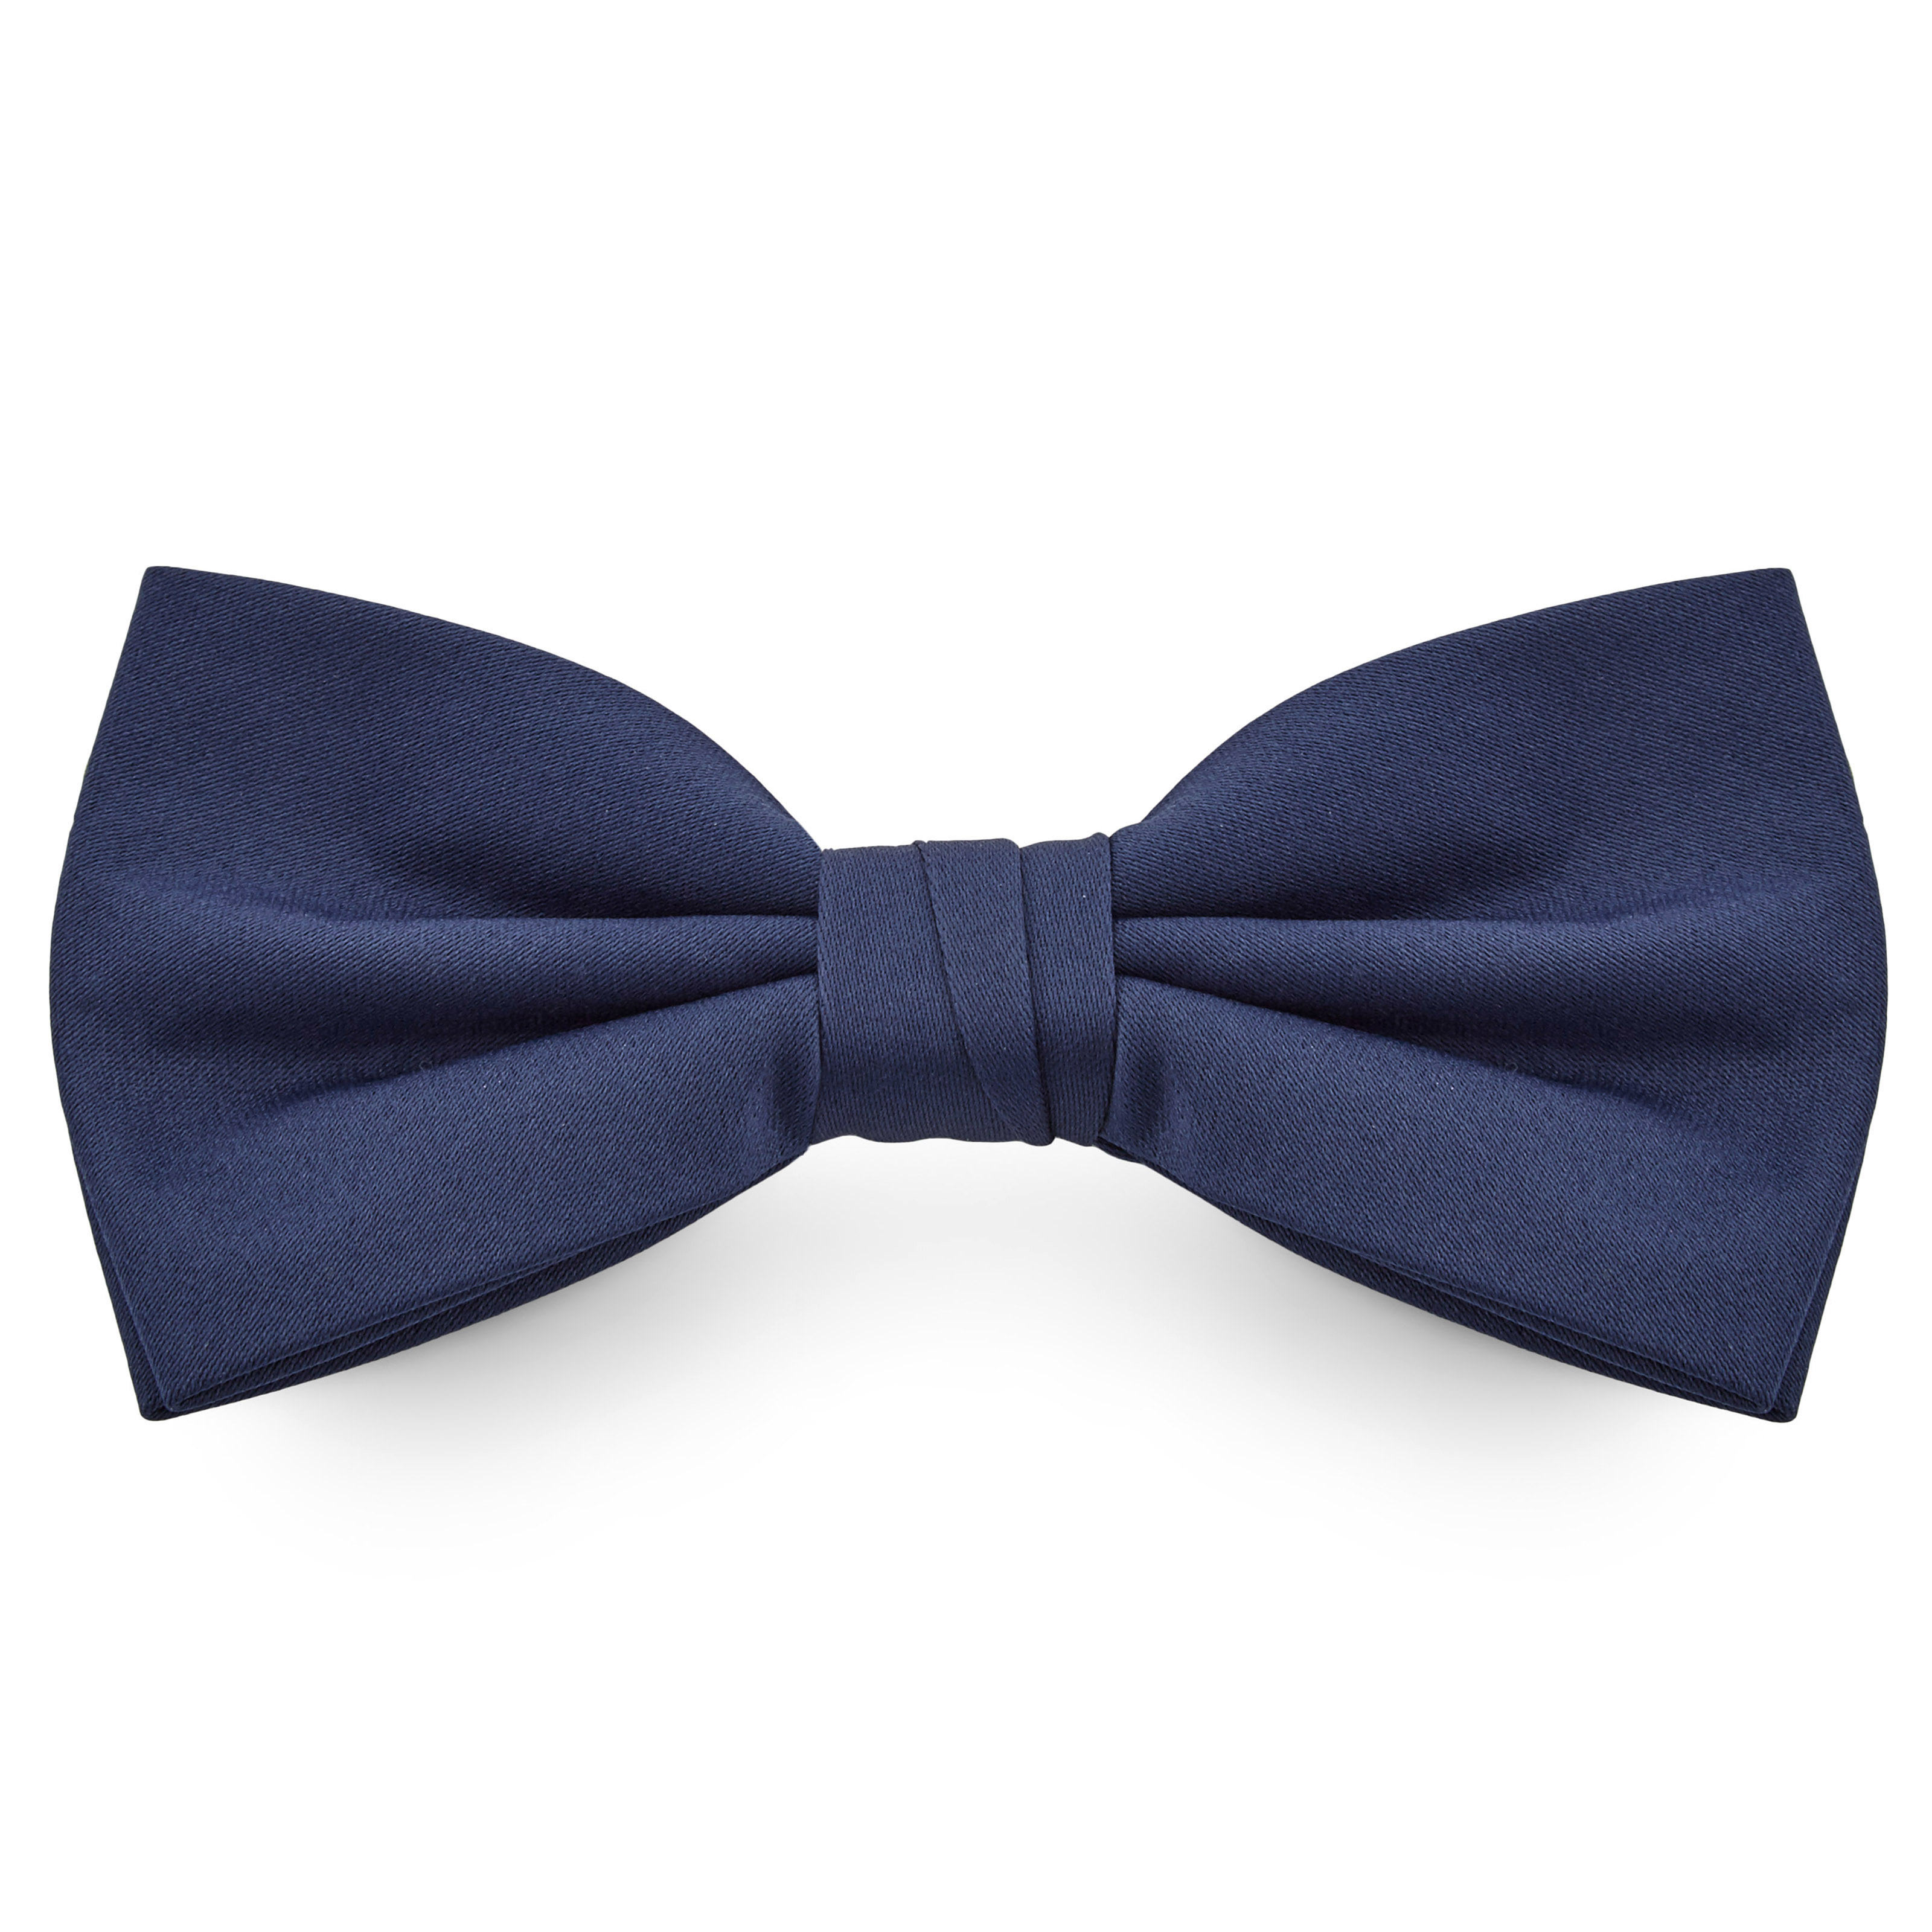 When to Wear a Bow Tie